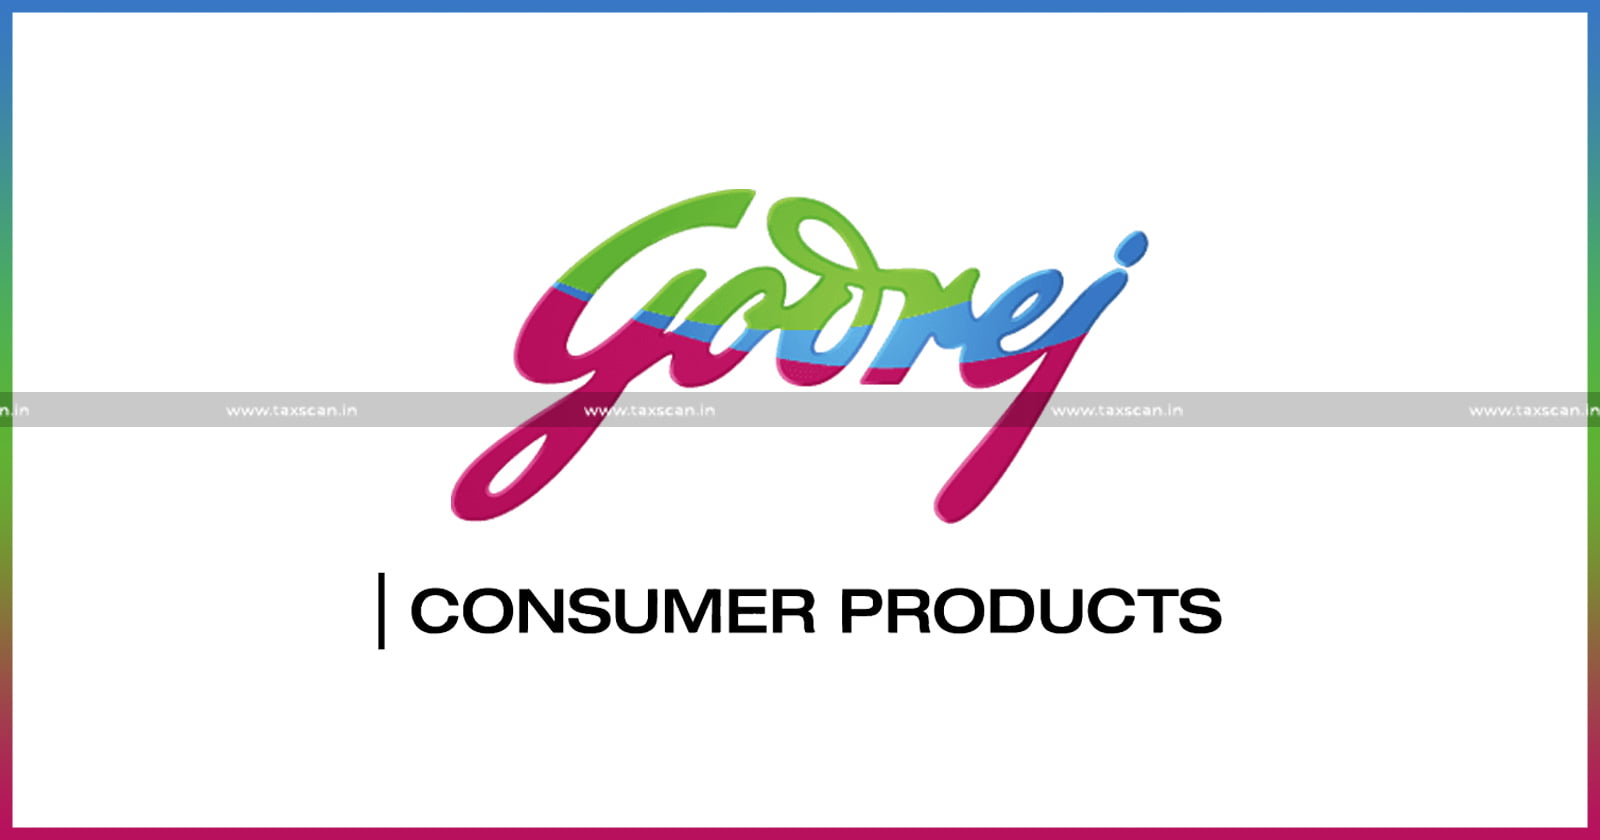 Service Tax not Payable for Services - Service Tax - Service Tax not Payable for Services for Periods which they were not Taxable - CESTAT rules in favour of Godrej Consumer Product - CESTAT - Godrej Consumer Product - Taxscan